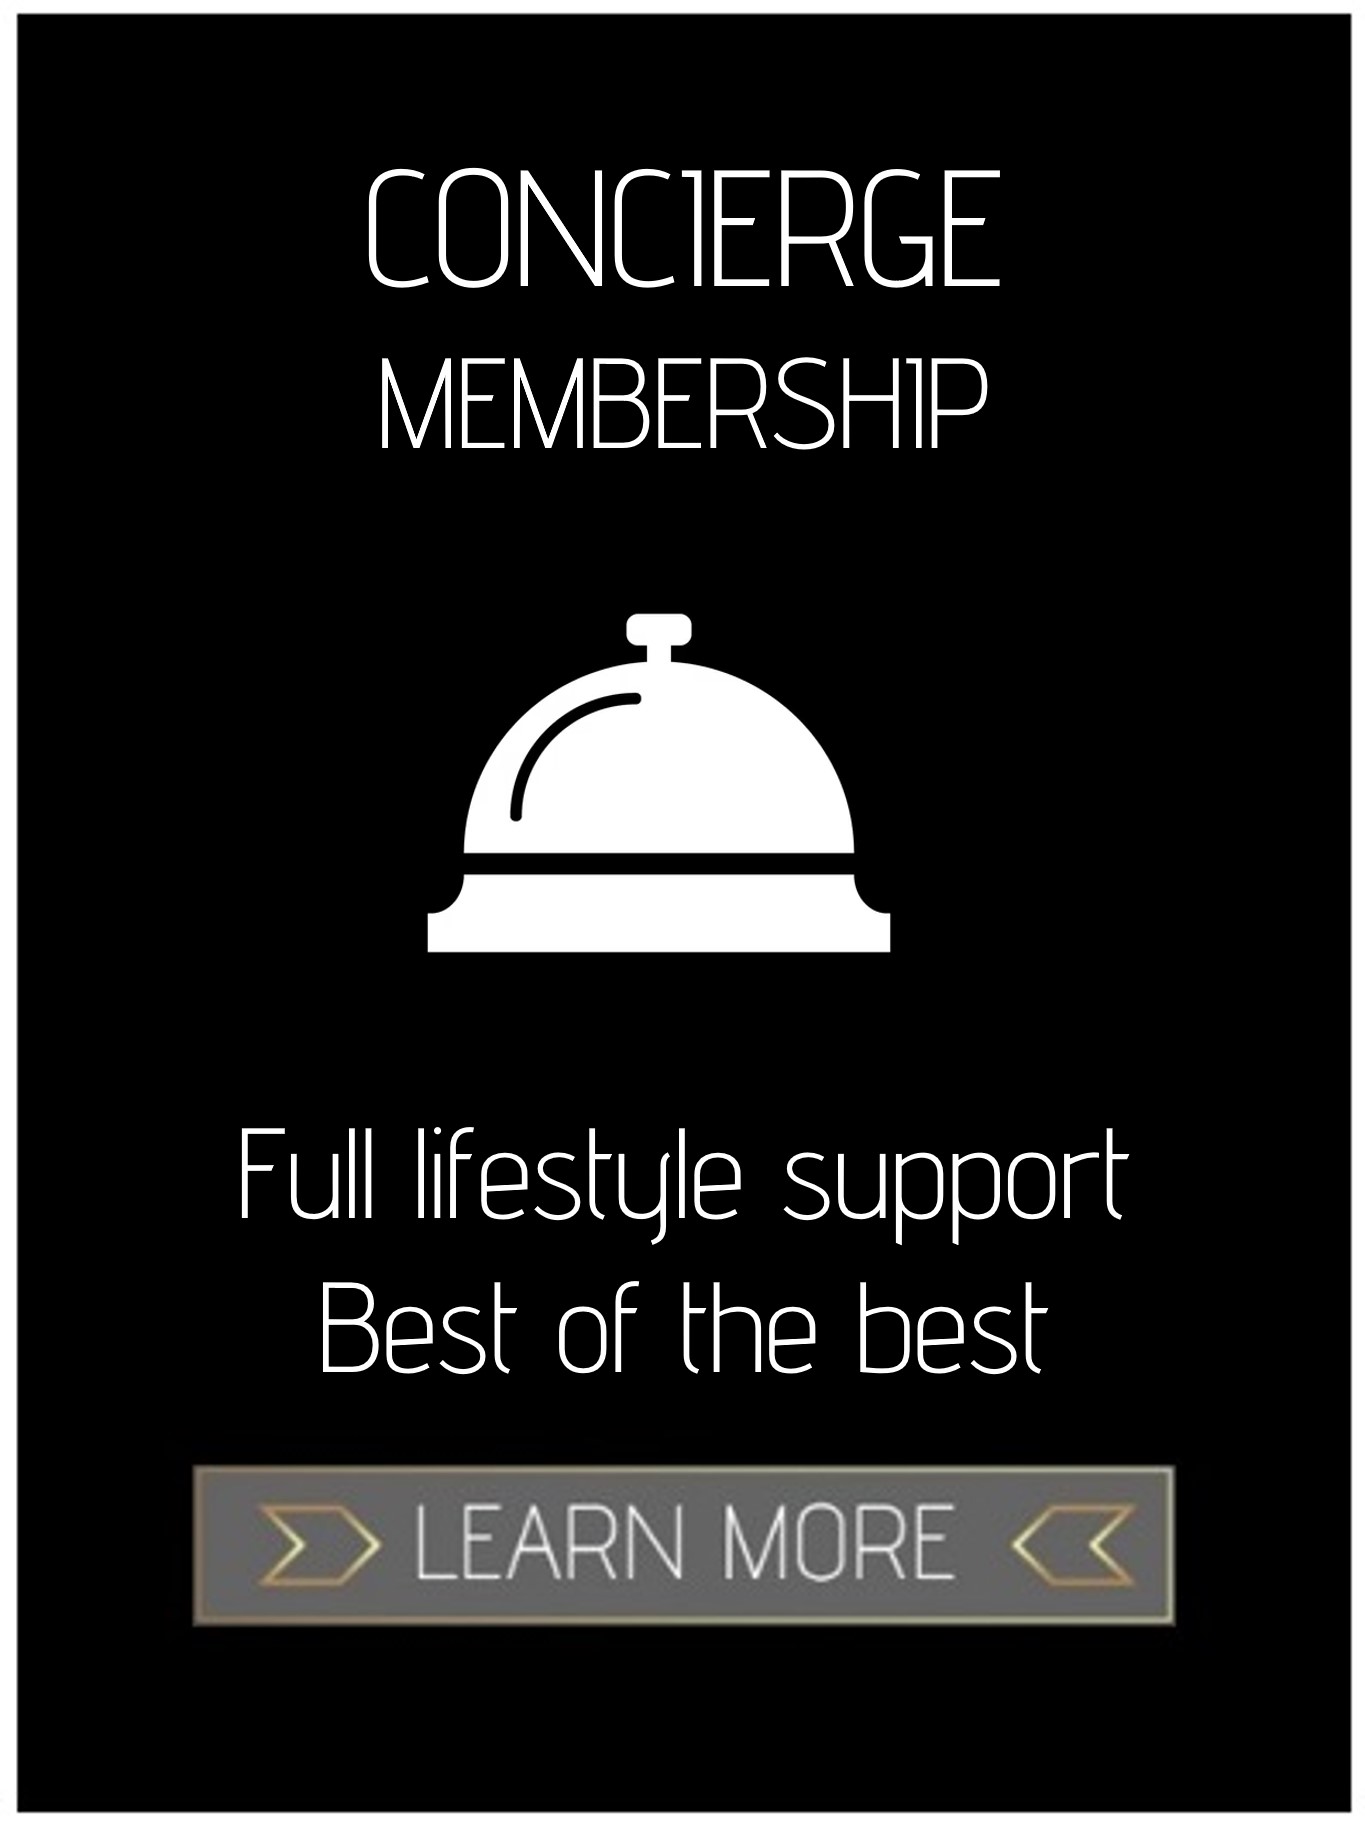 join sincura concierge membership for our award wining lifestyle services